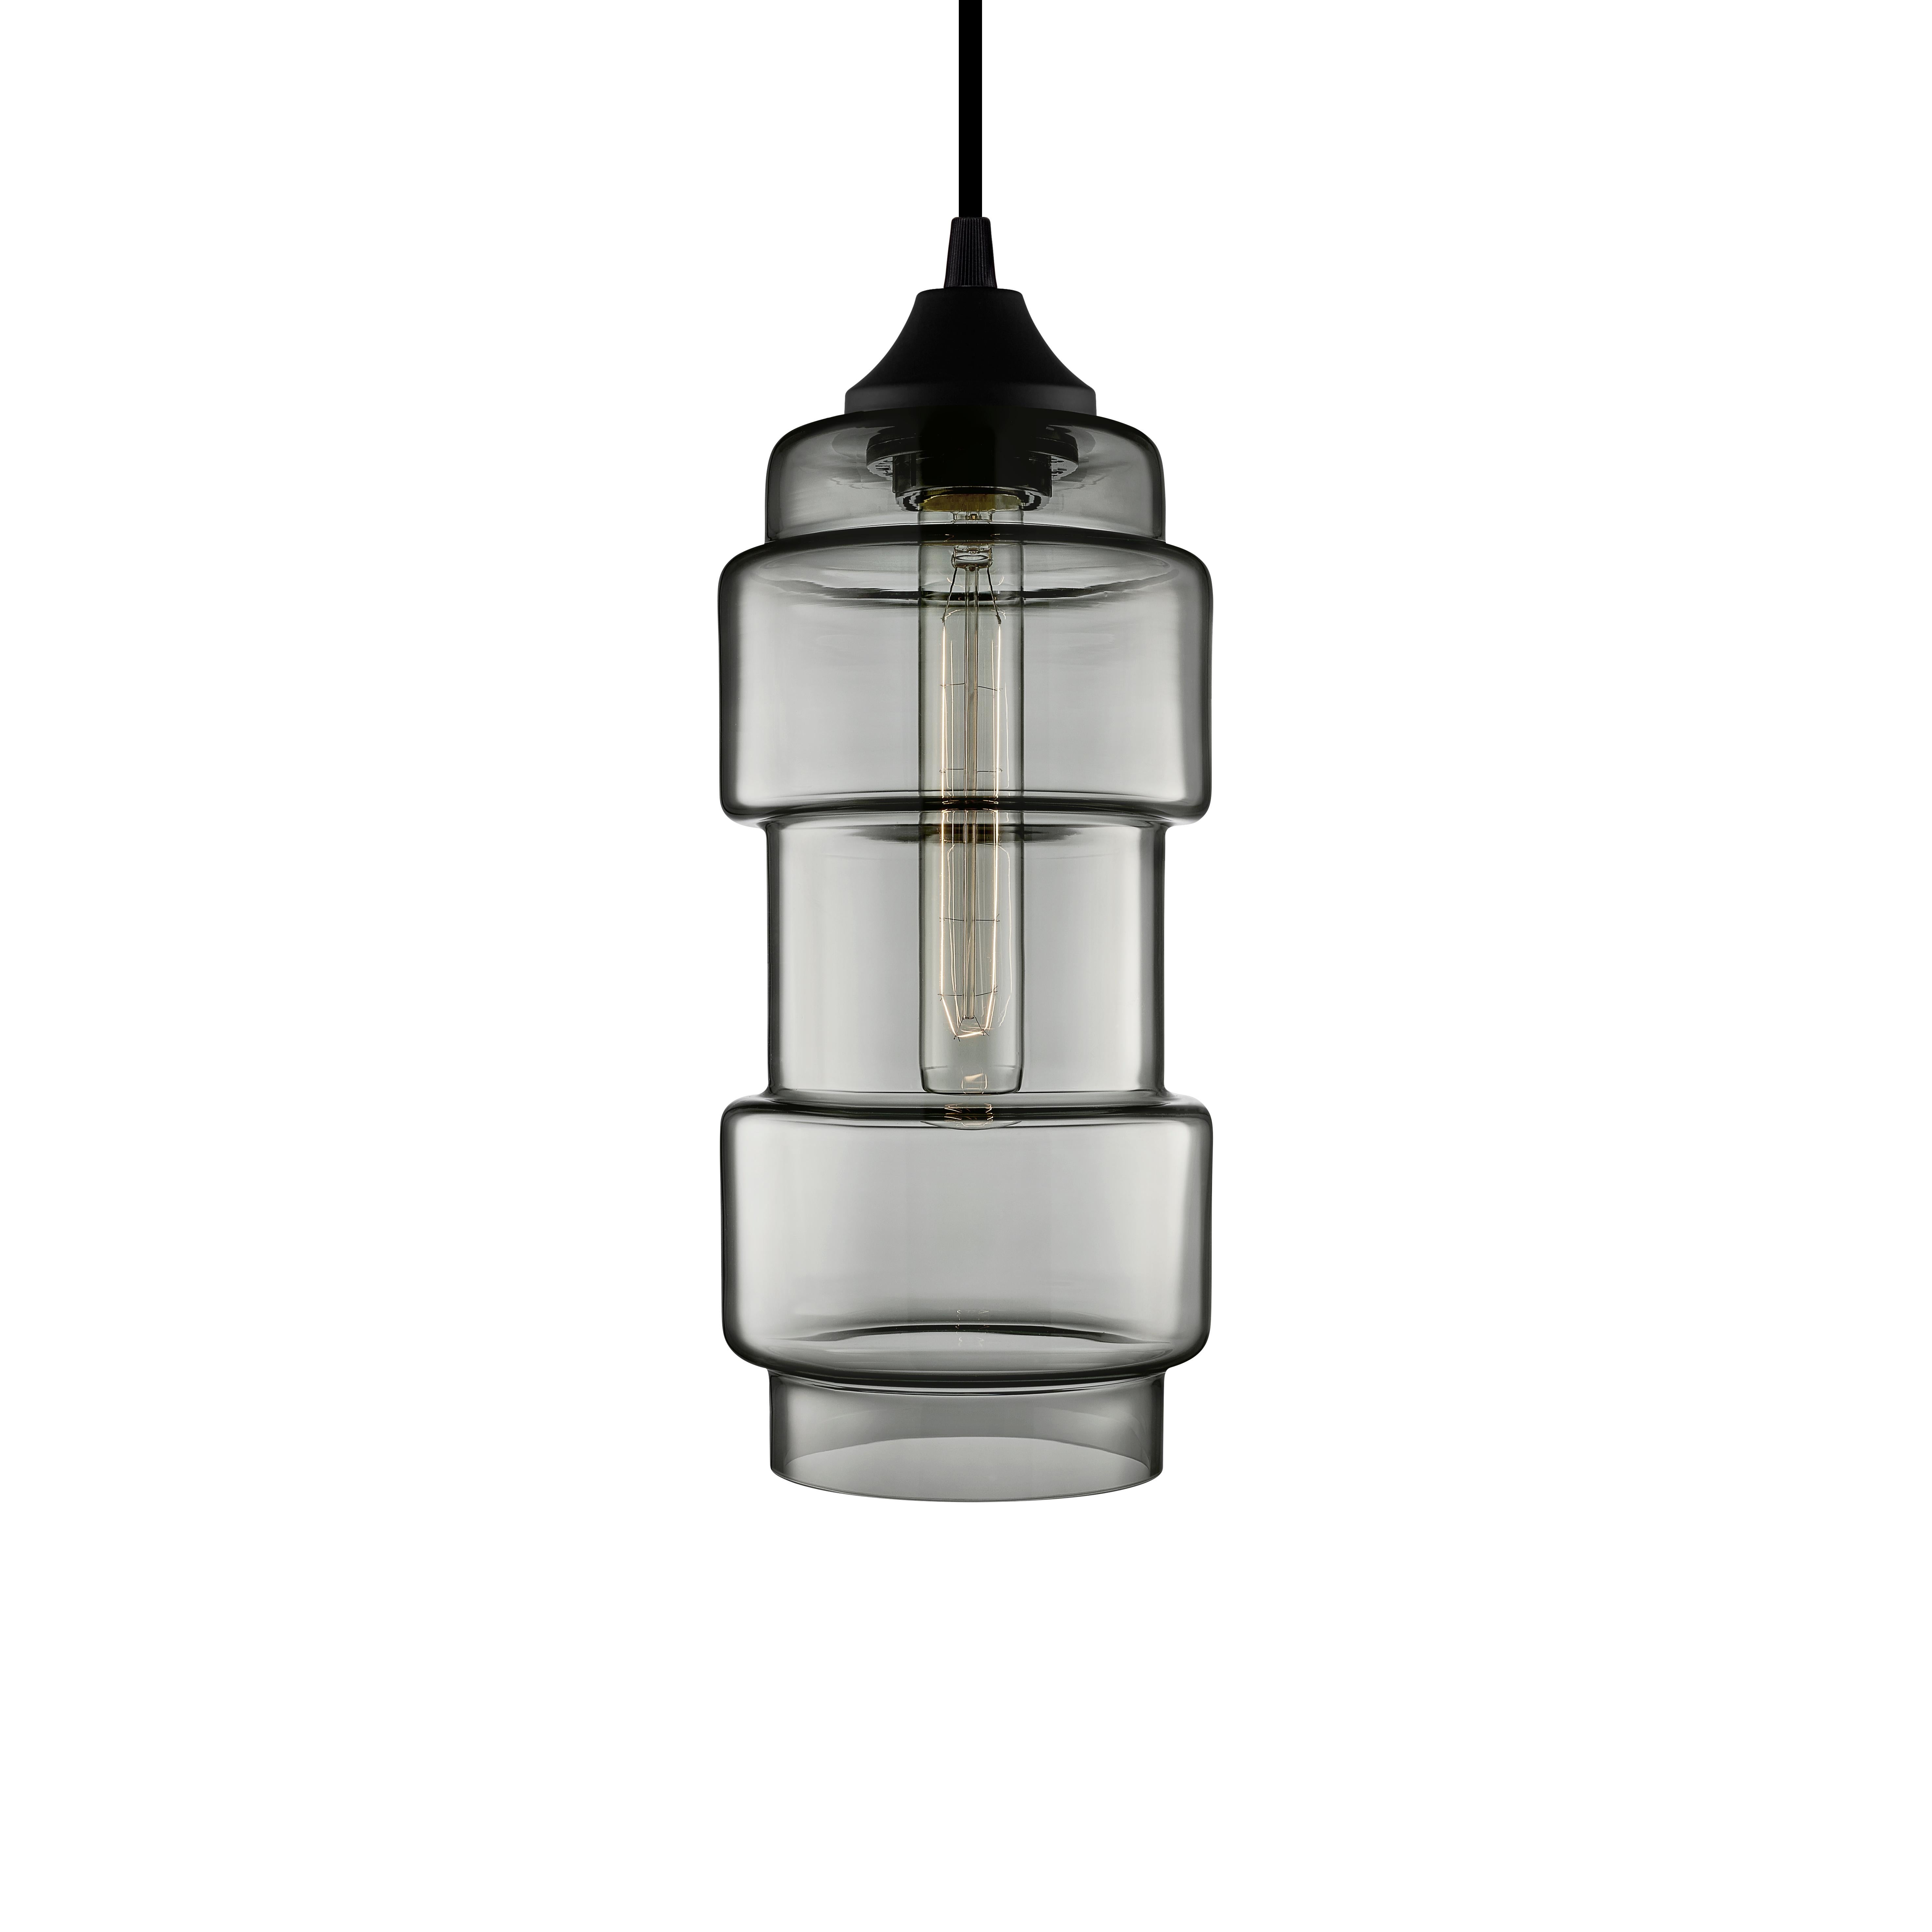 American Muralla Crystal Optique Handblown Modern Glass Pendant Light, Made in the USA For Sale